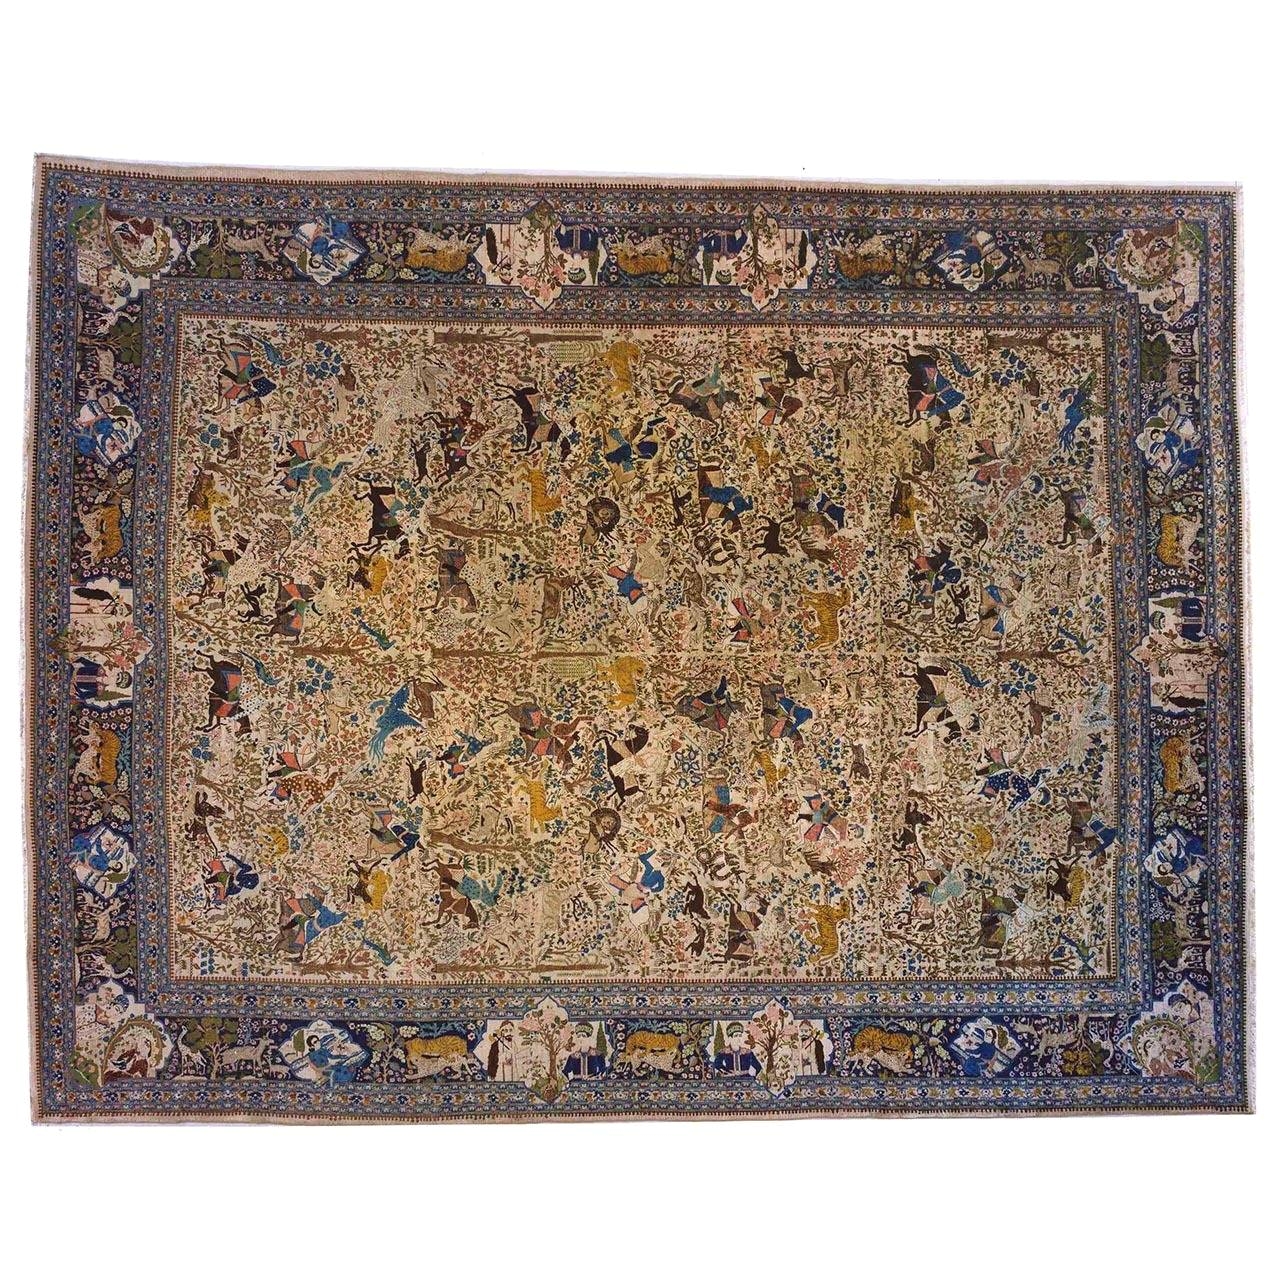 Different Types Of oriental Rugs Antique Persian Tabriz Animal Carpet In Large Size with Intricate